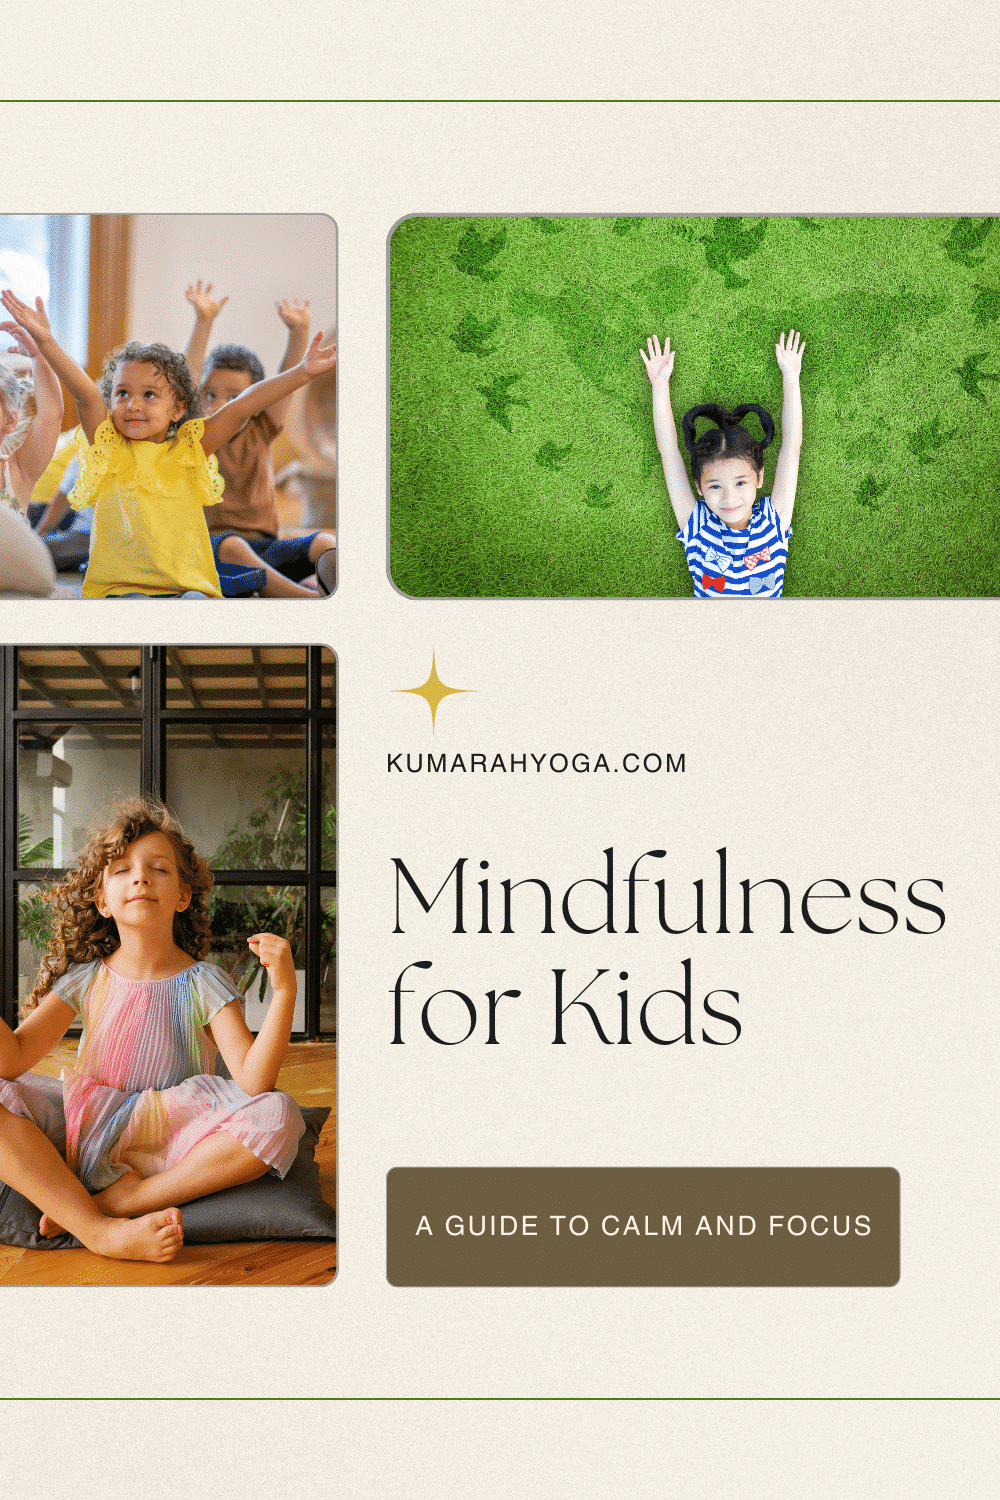 mindfulness for kids, a guide to cultivating calm and focus